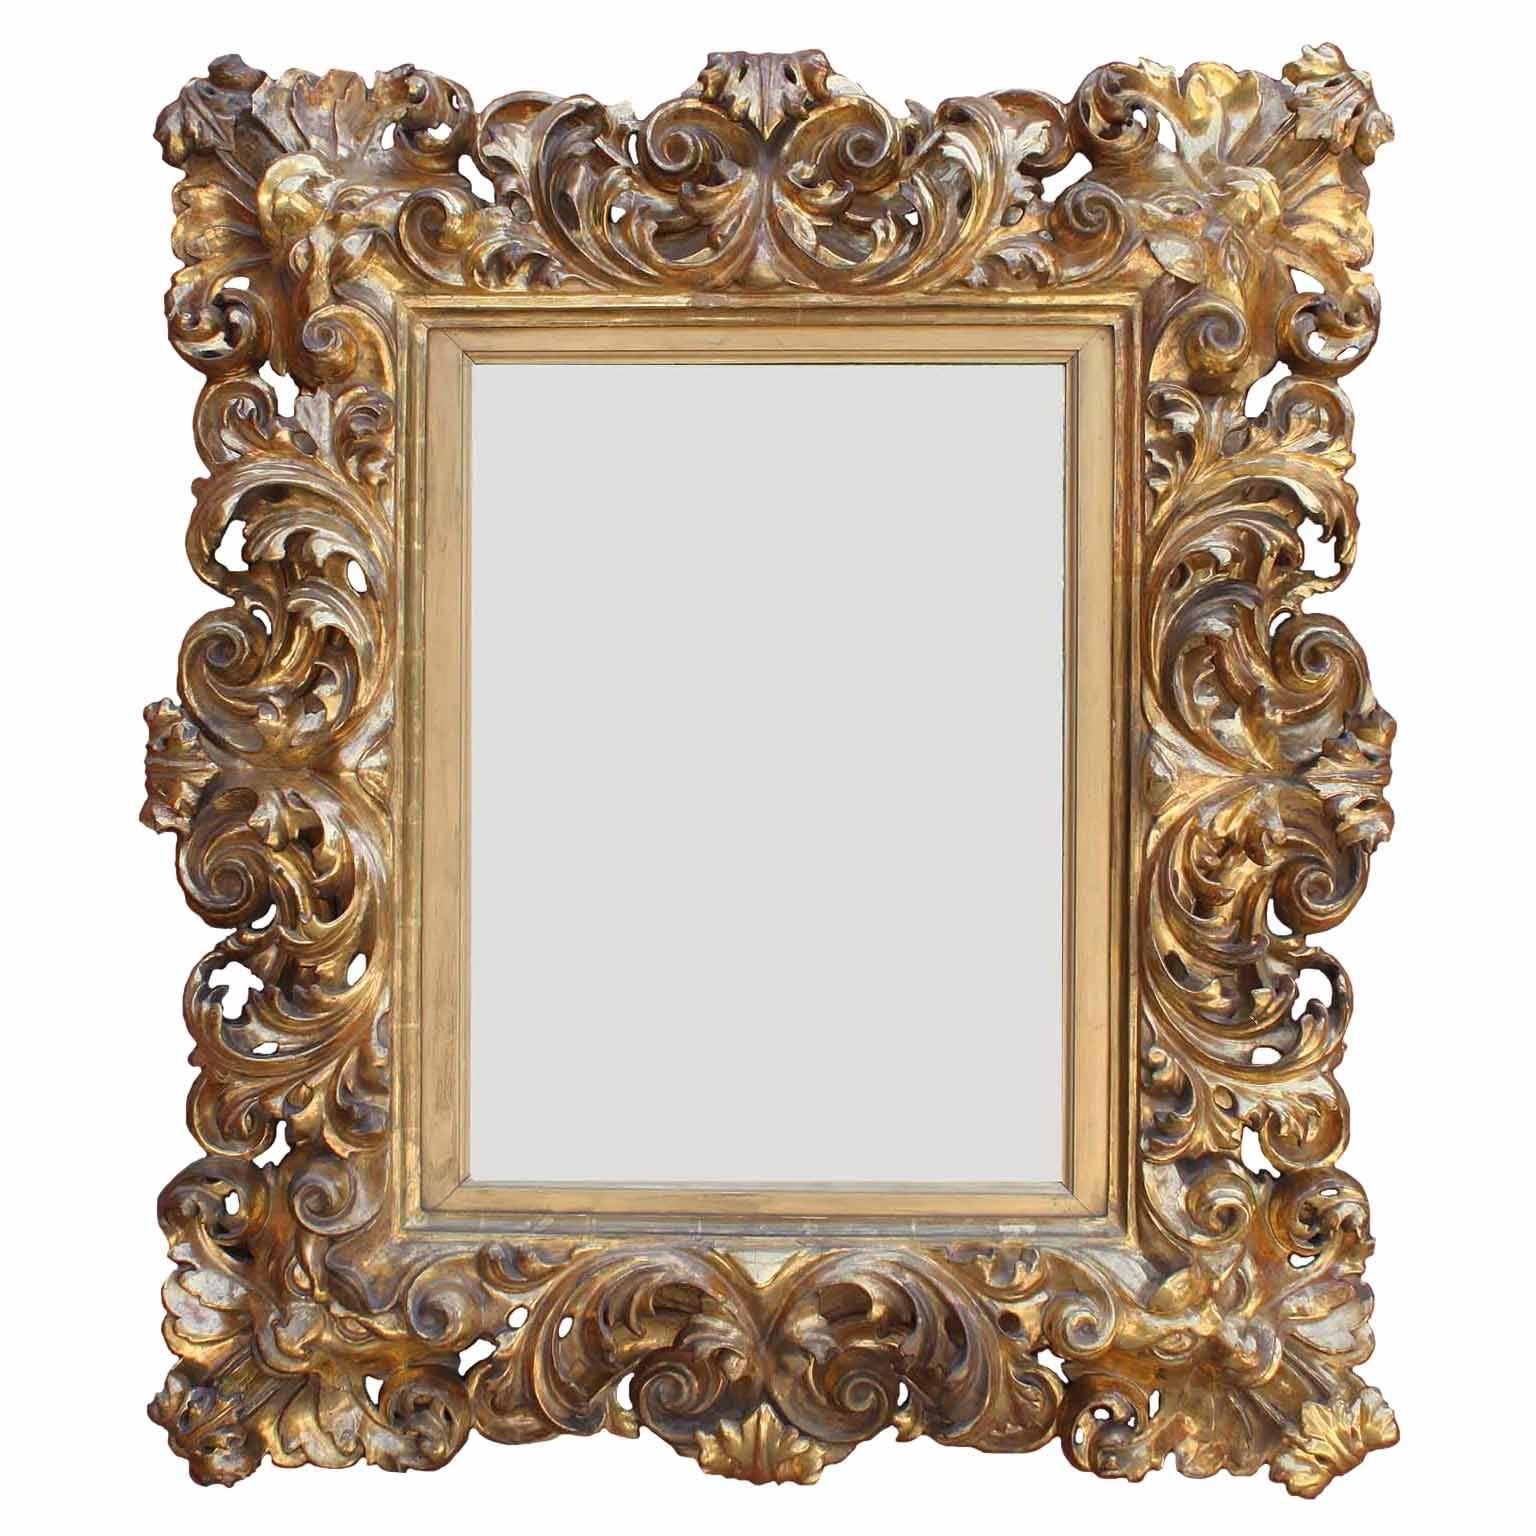 Fine Florentine 19th Century Baroque Style Giltwood Carved Figural Mirror Frame